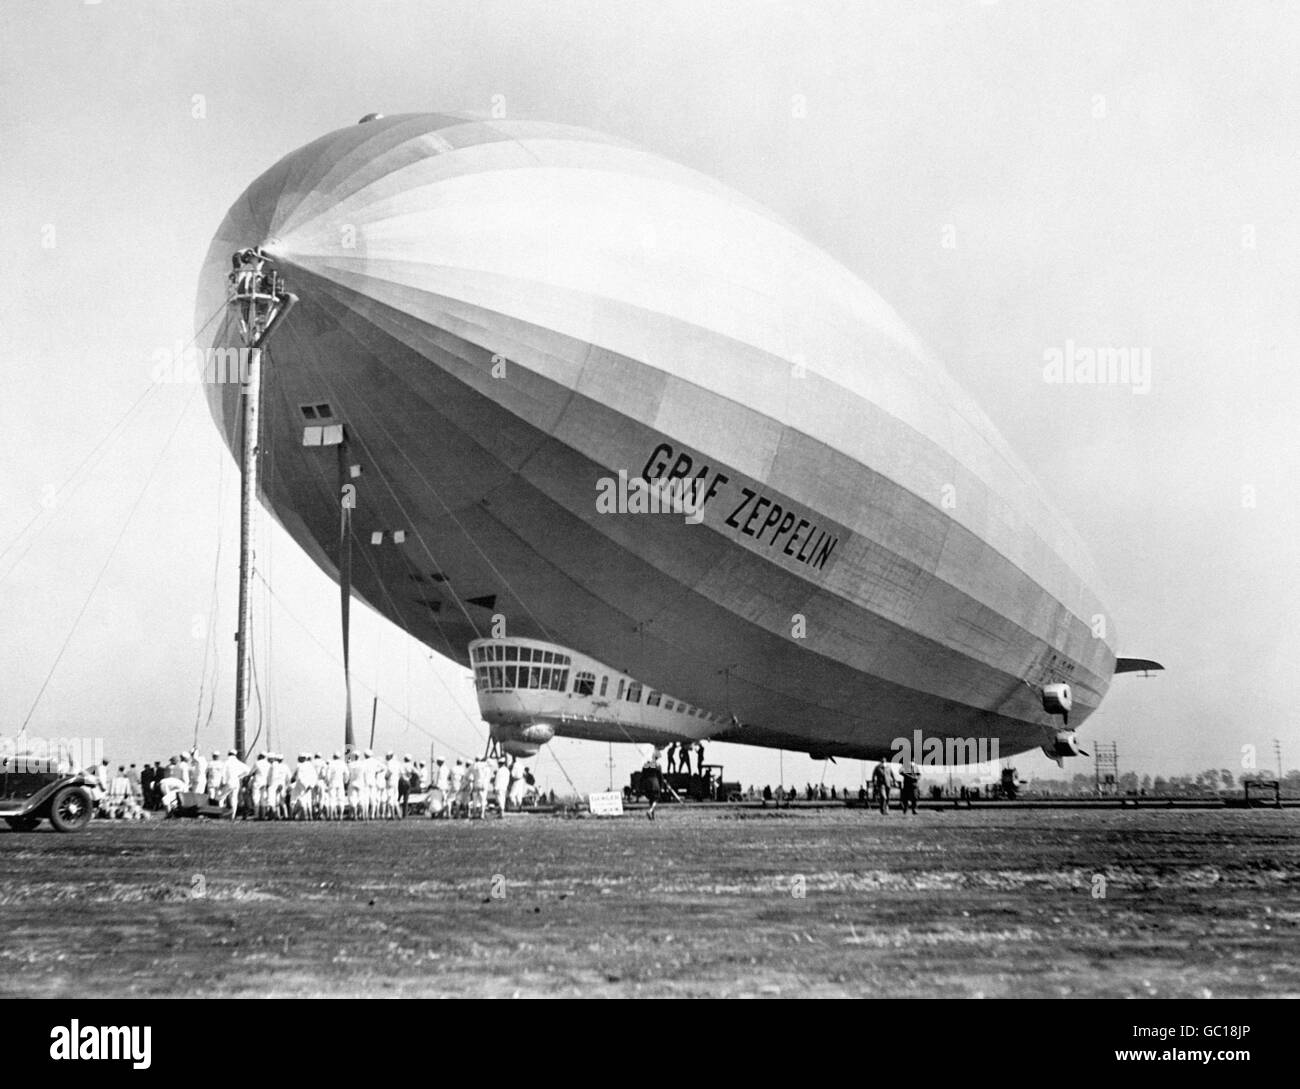 The giant German airship 'Graf Zeppelin' rests at the moorings at Mines Fields in Los Angeles, USA, during her 'Round-the-World' voyage. Stock Photo